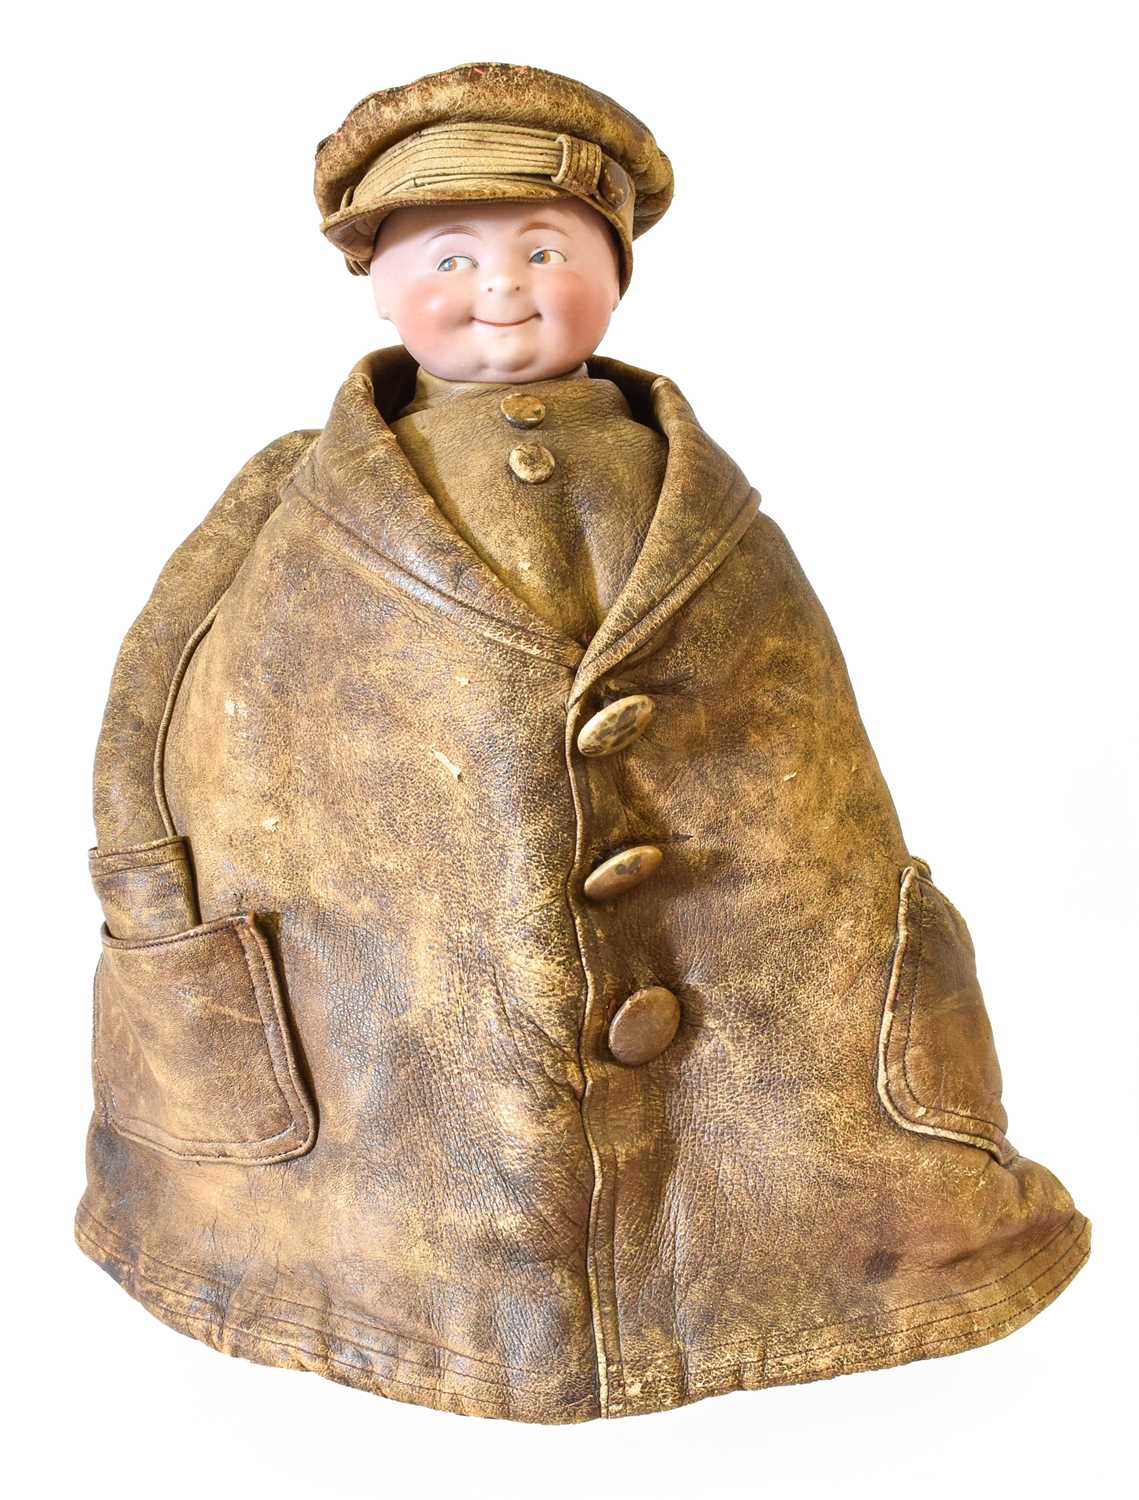 A First World War/Post-War Soldier Doll Tea Cosy, with bisque flange Kewpie type head, wearing a - Image 2 of 3